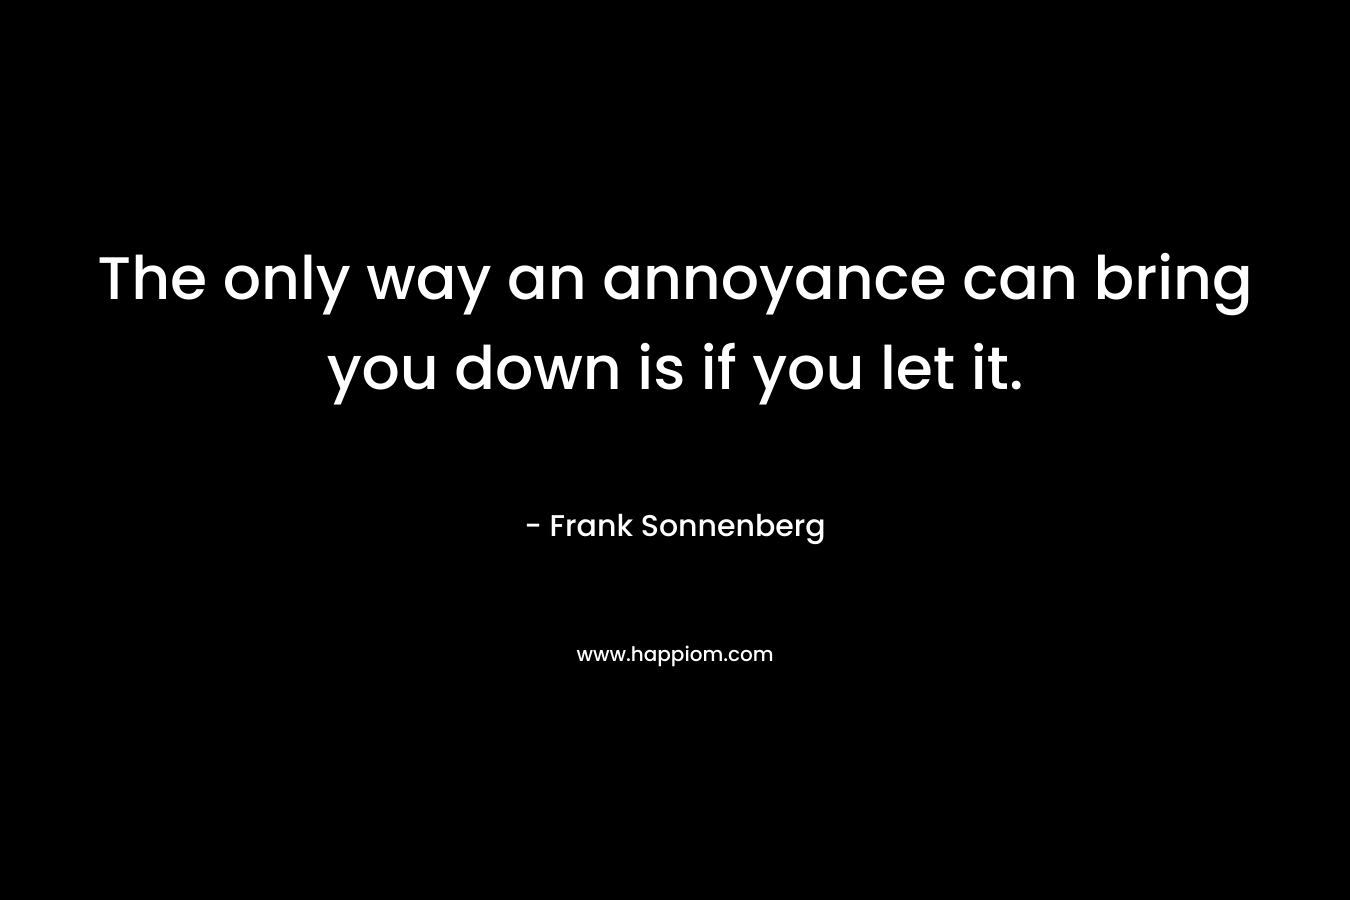 The only way an annoyance can bring you down is if you let it. – Frank Sonnenberg